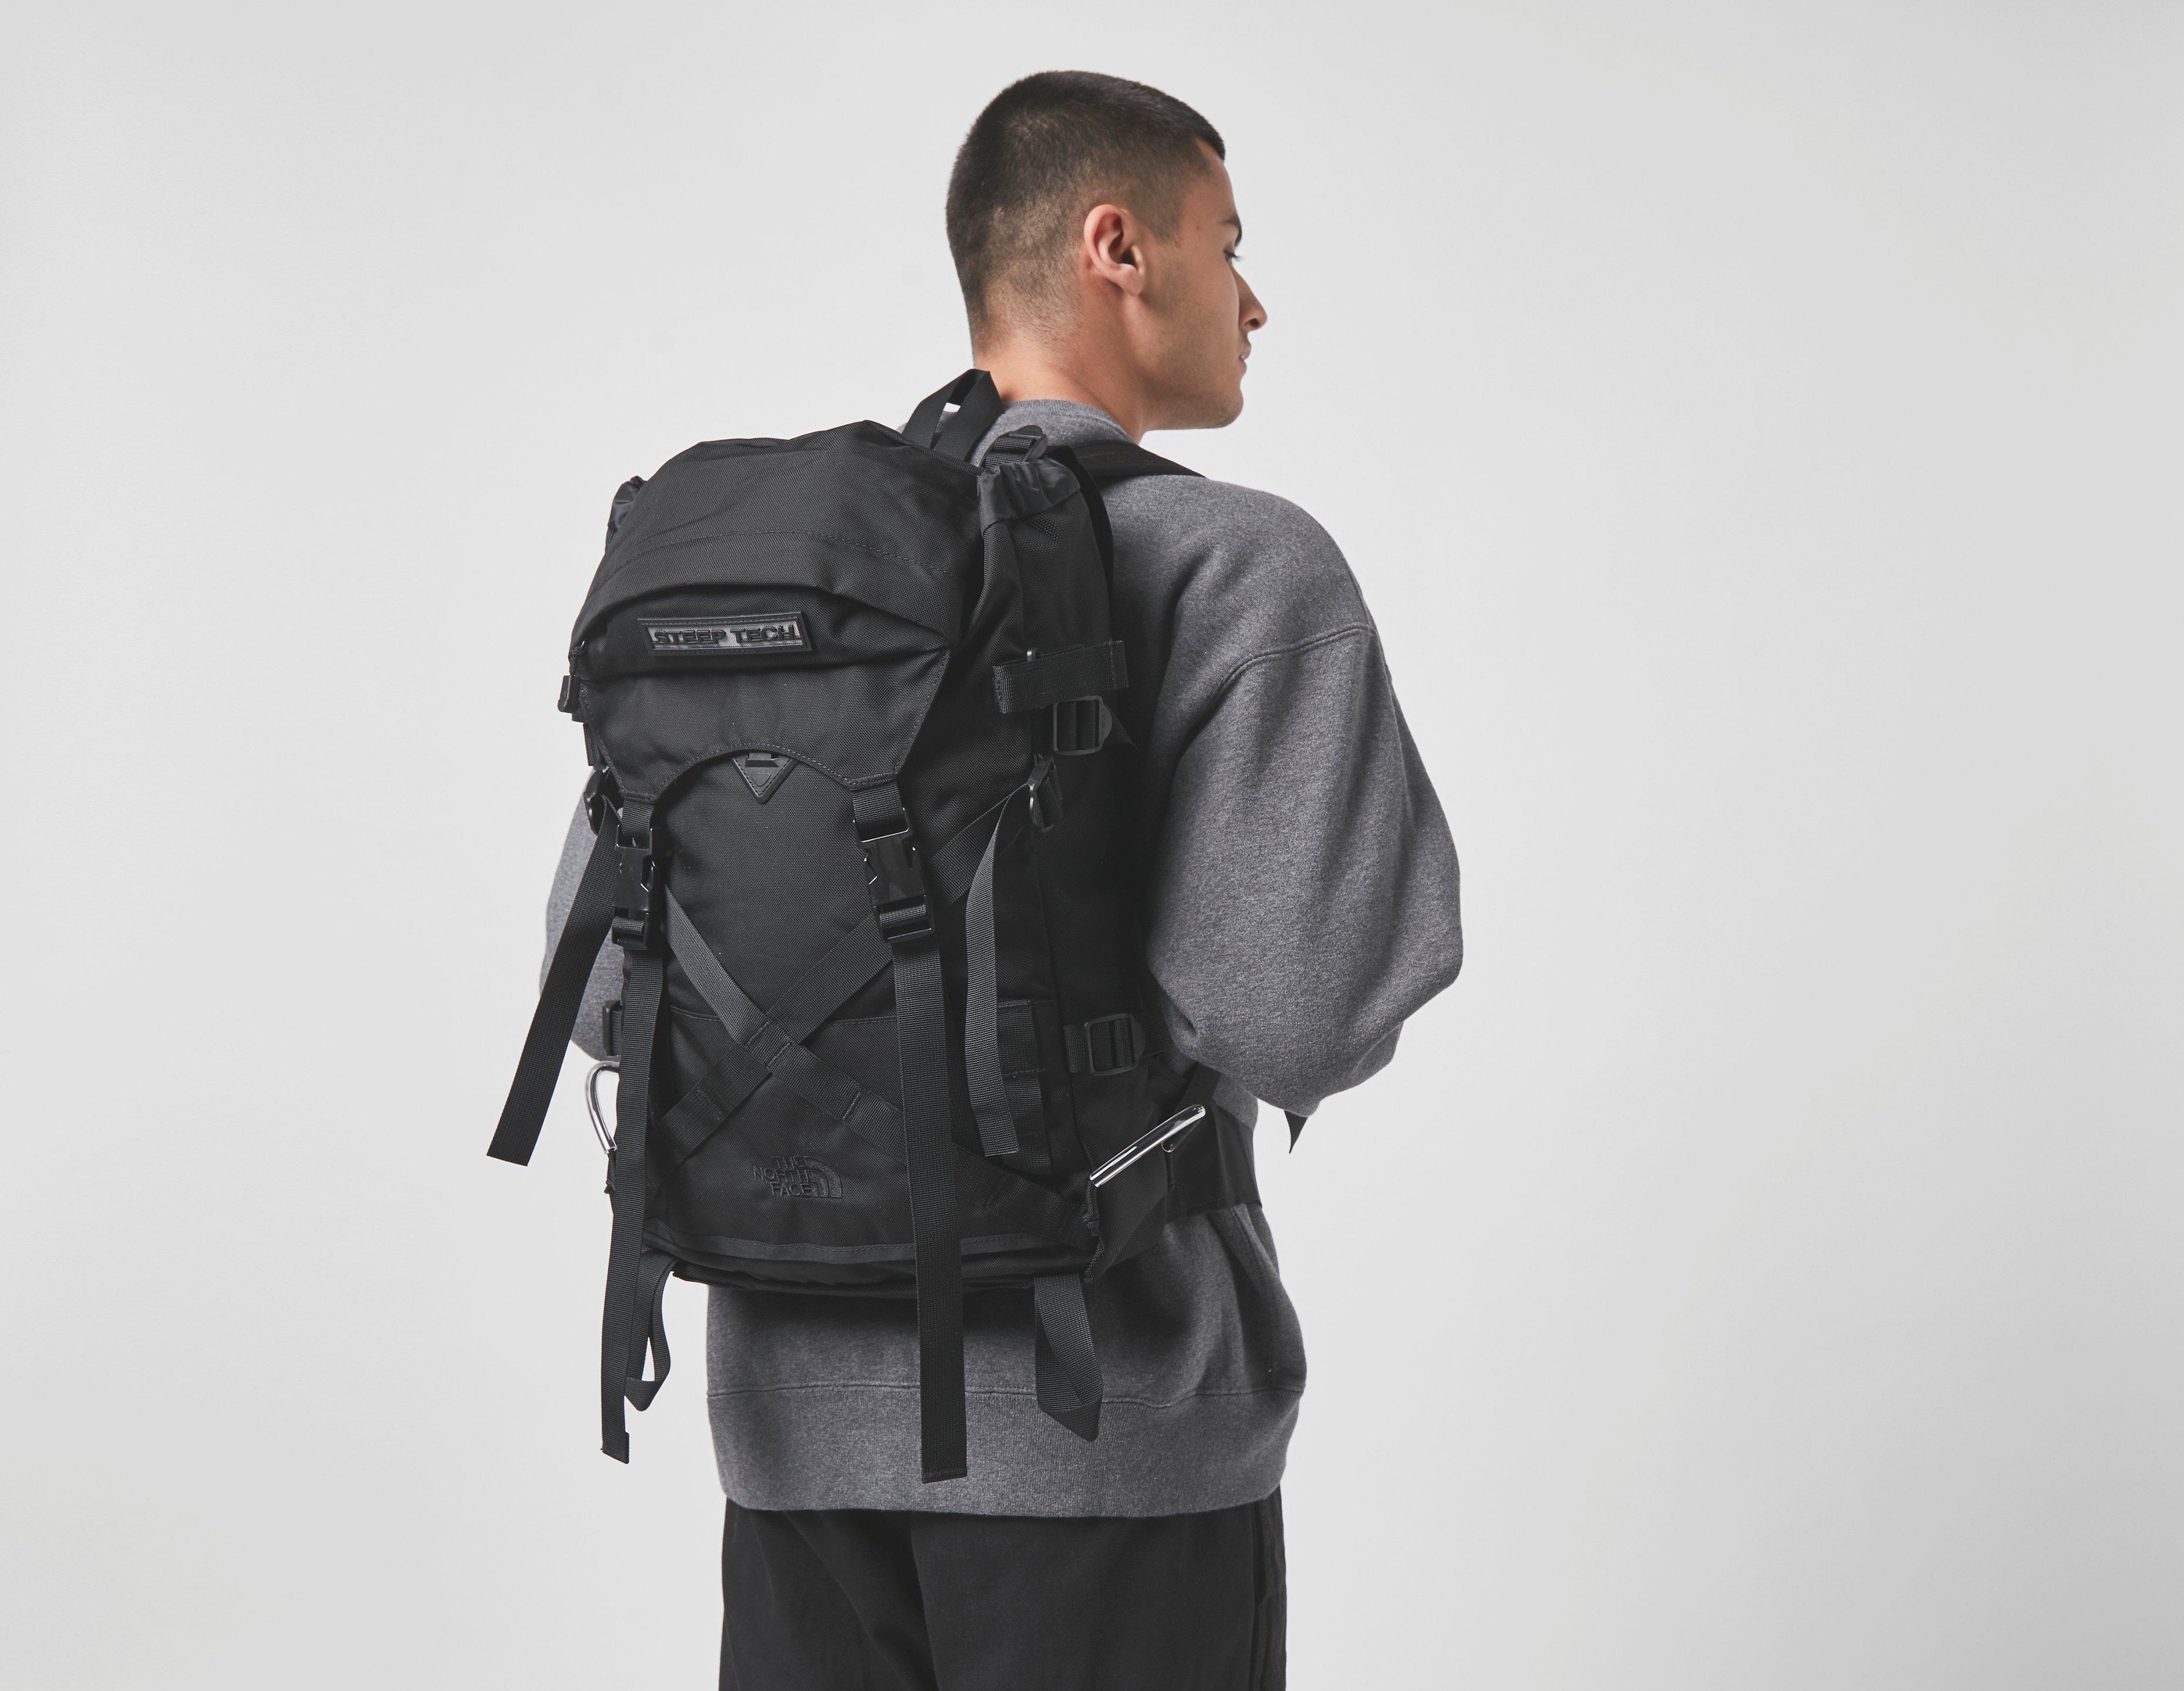 north face steep tech backpack